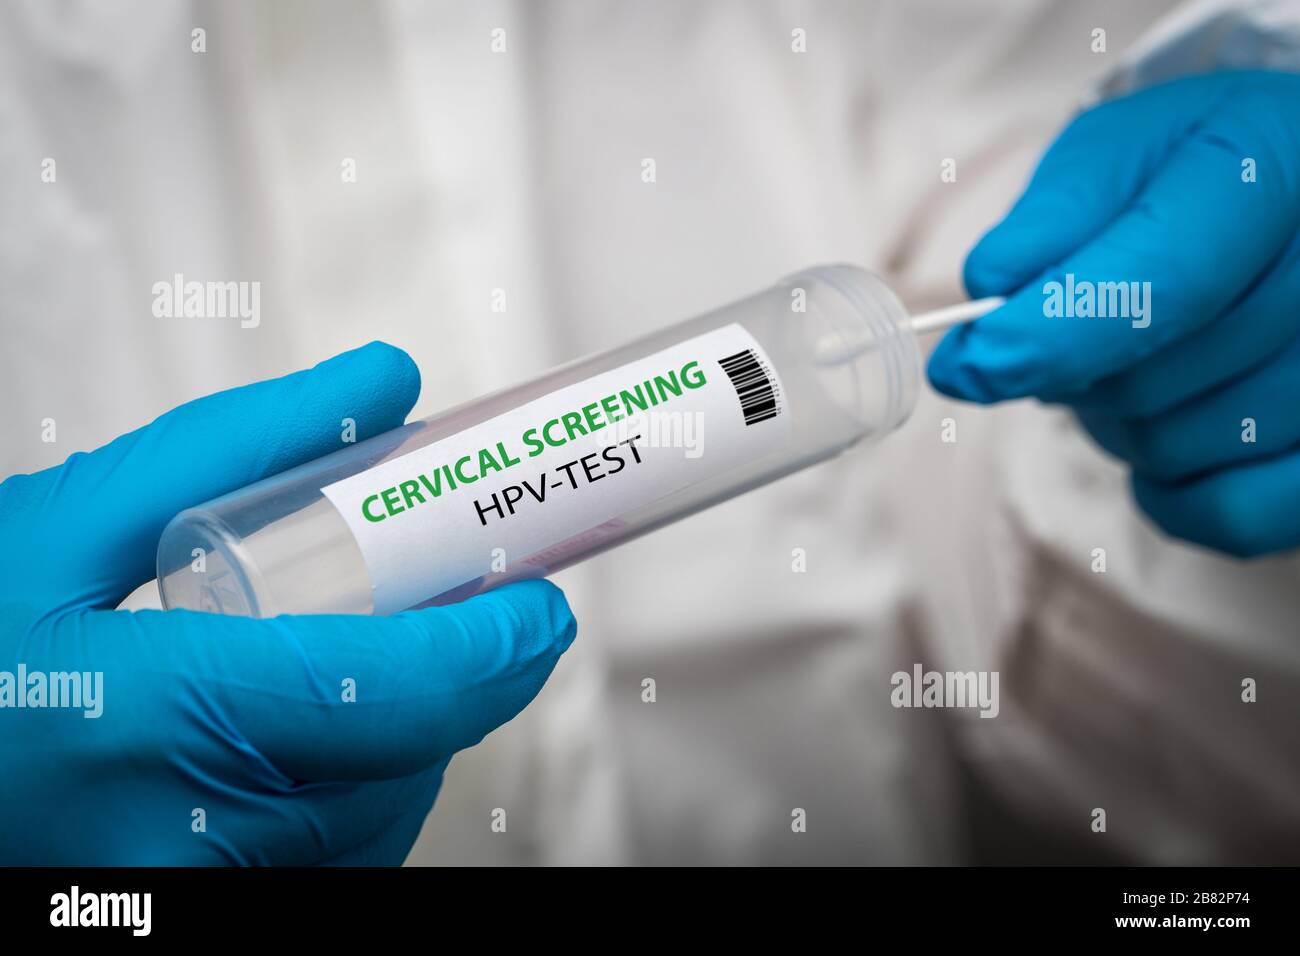 Cervical screening HPV test also known as a smear test Stock Photo